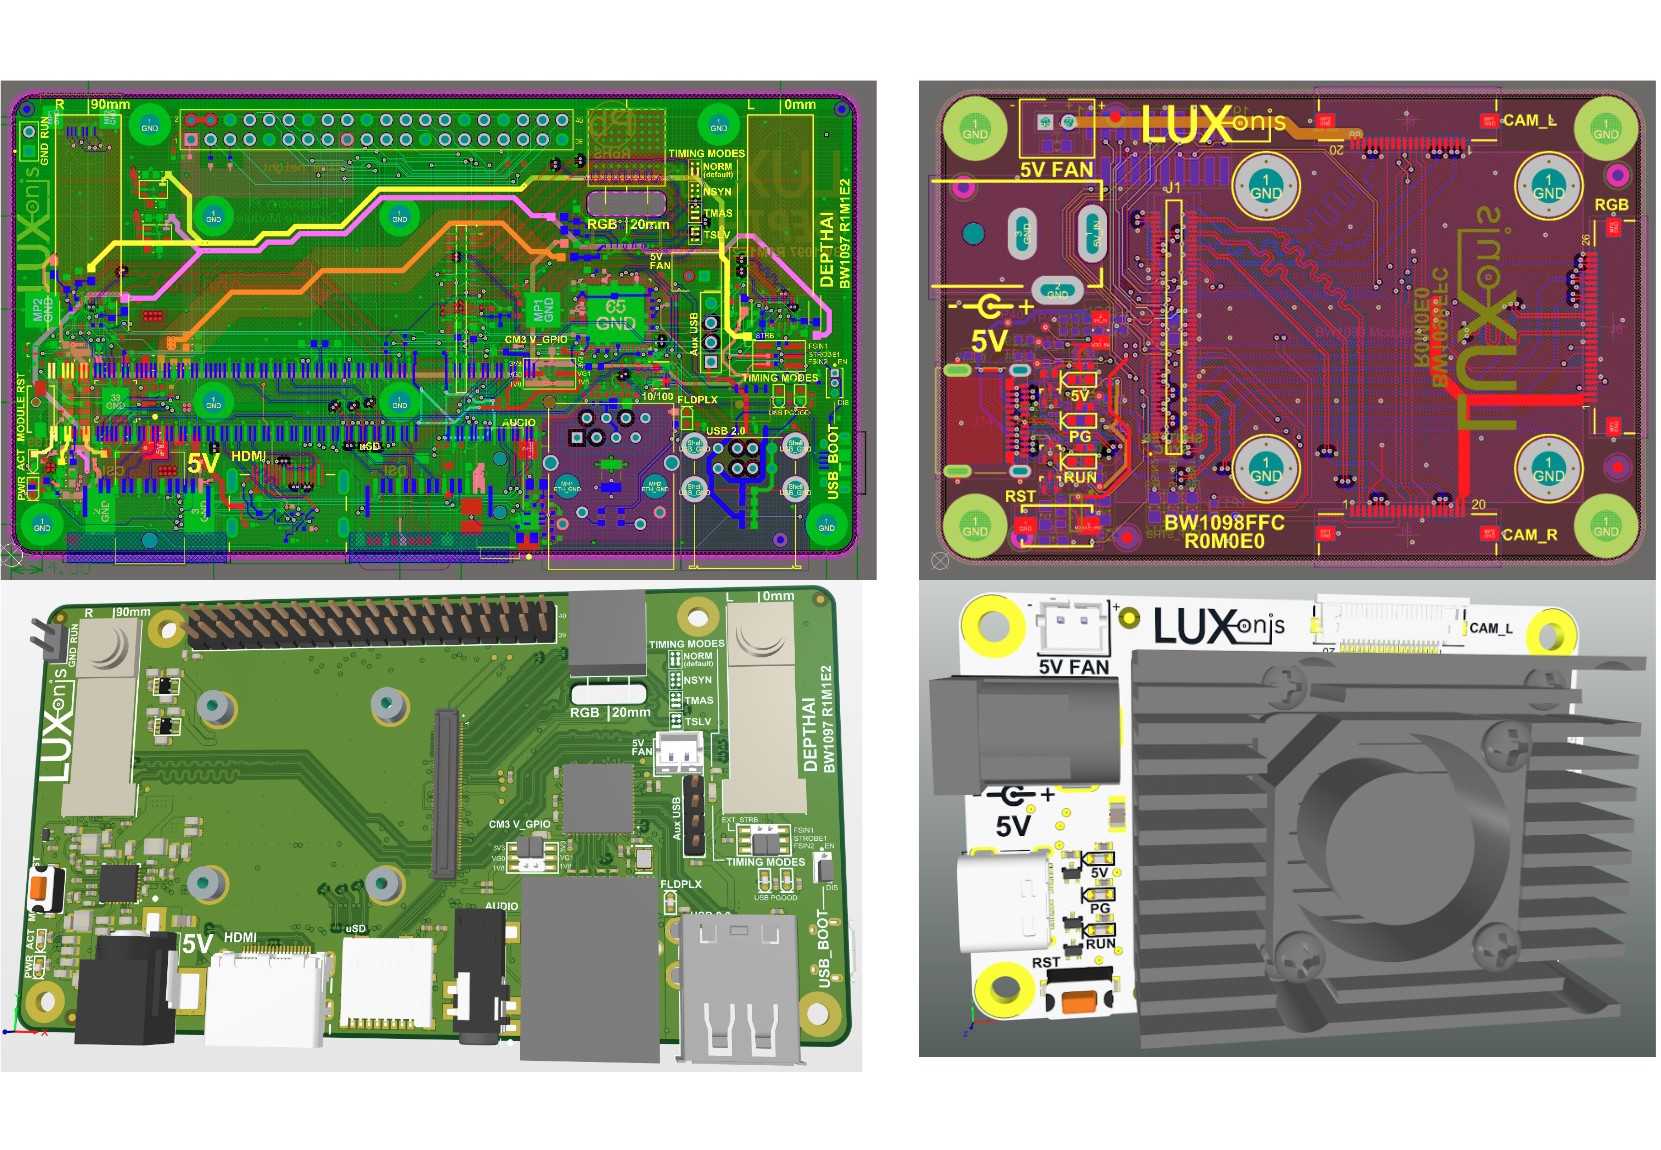 Images of a Luxonis sensor device circuit board.